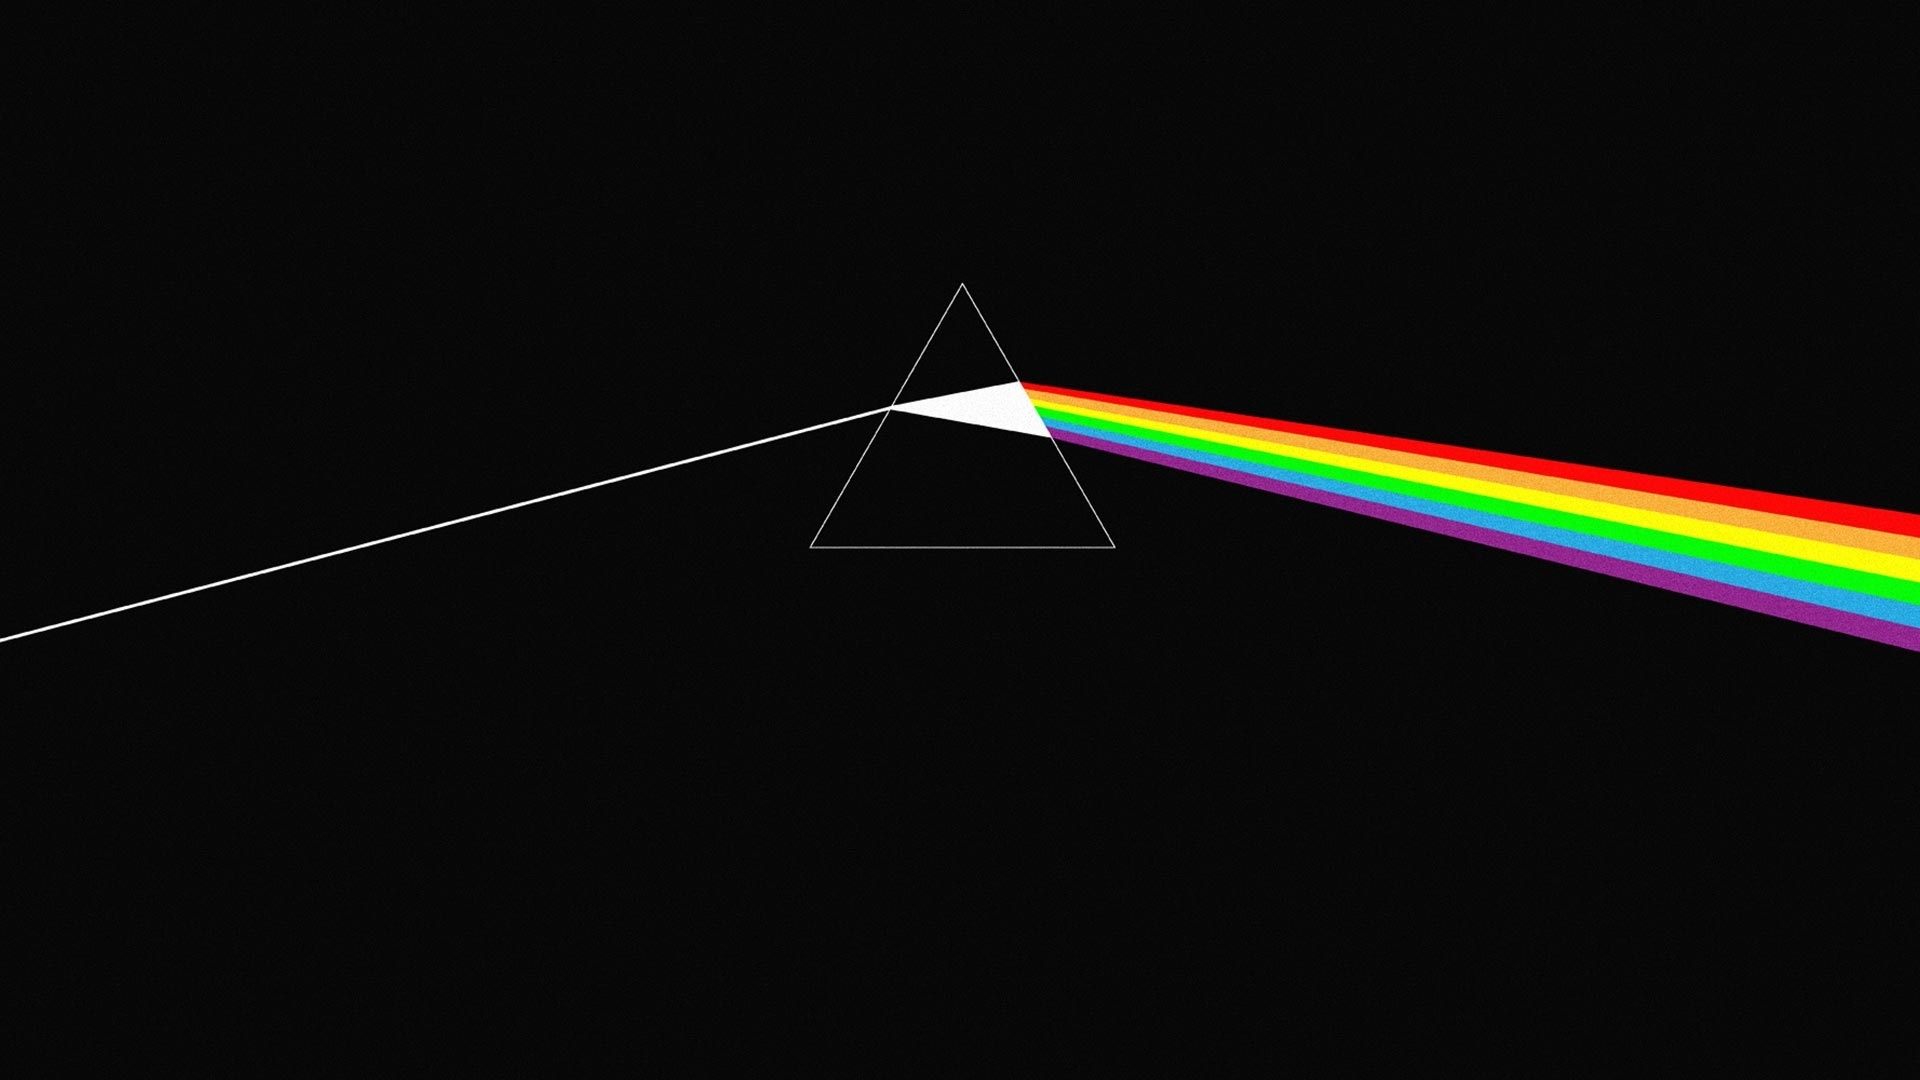 10 New Pink Floyd Dark Side Of The Moon Wallpaper Full Hd 1080p For